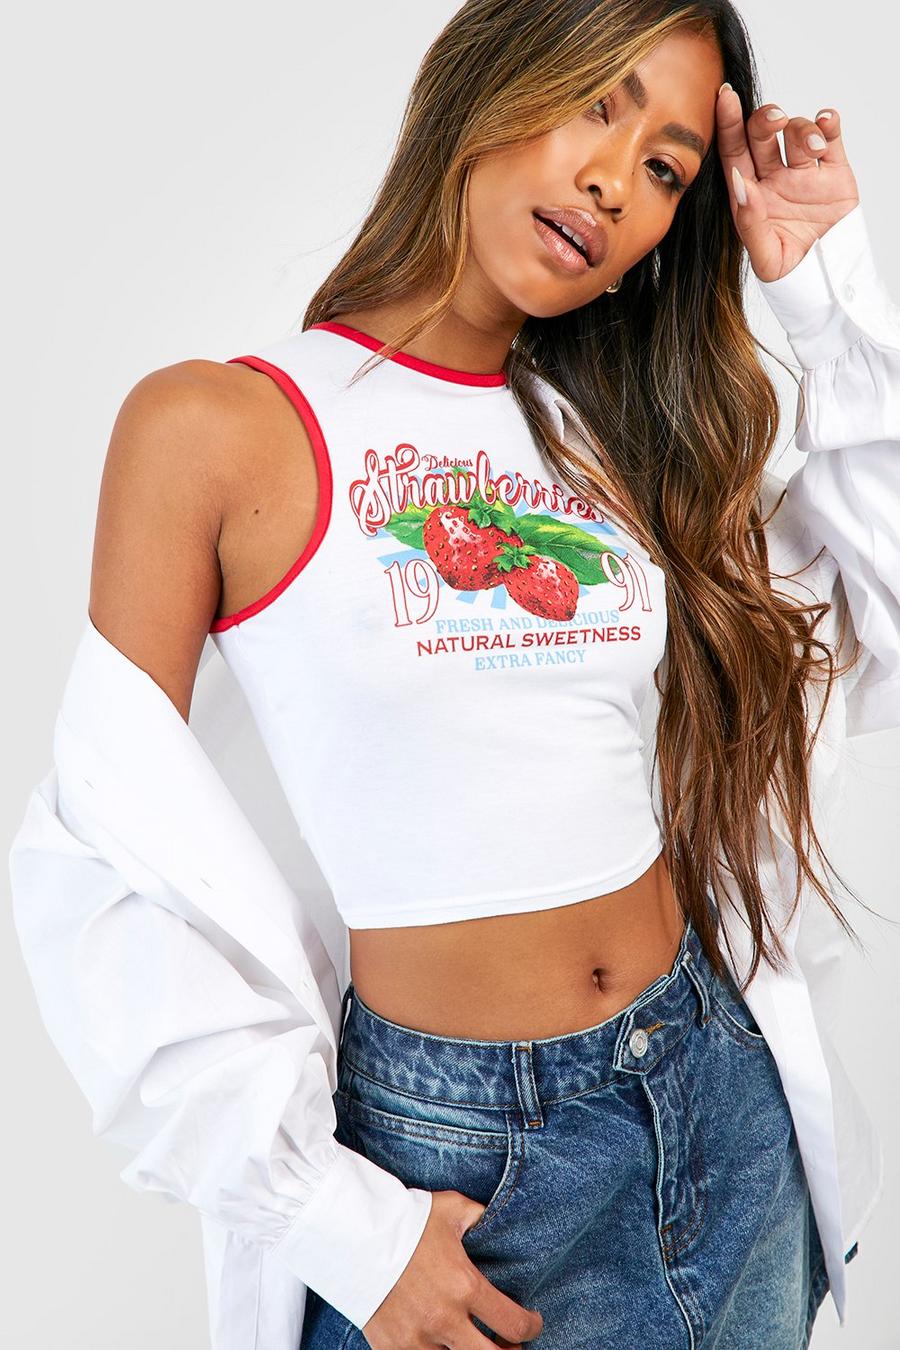 Strawberry corset top  Workout accessories, Outfit accessories